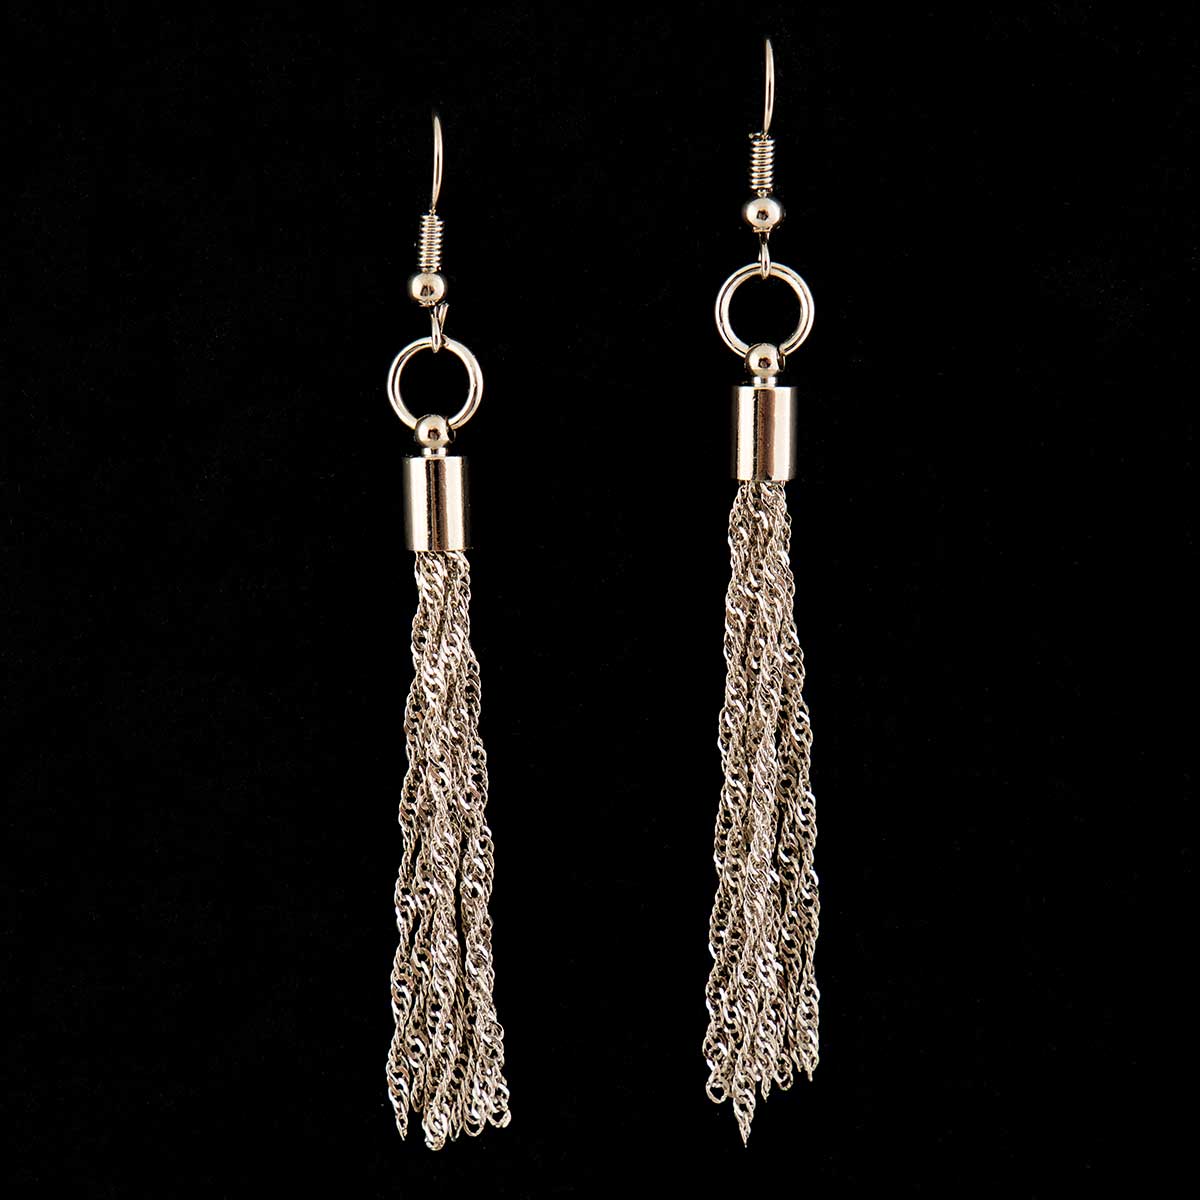 Silver 8 Strand Chain Dangle French Wire Earrings .25"x2.5"